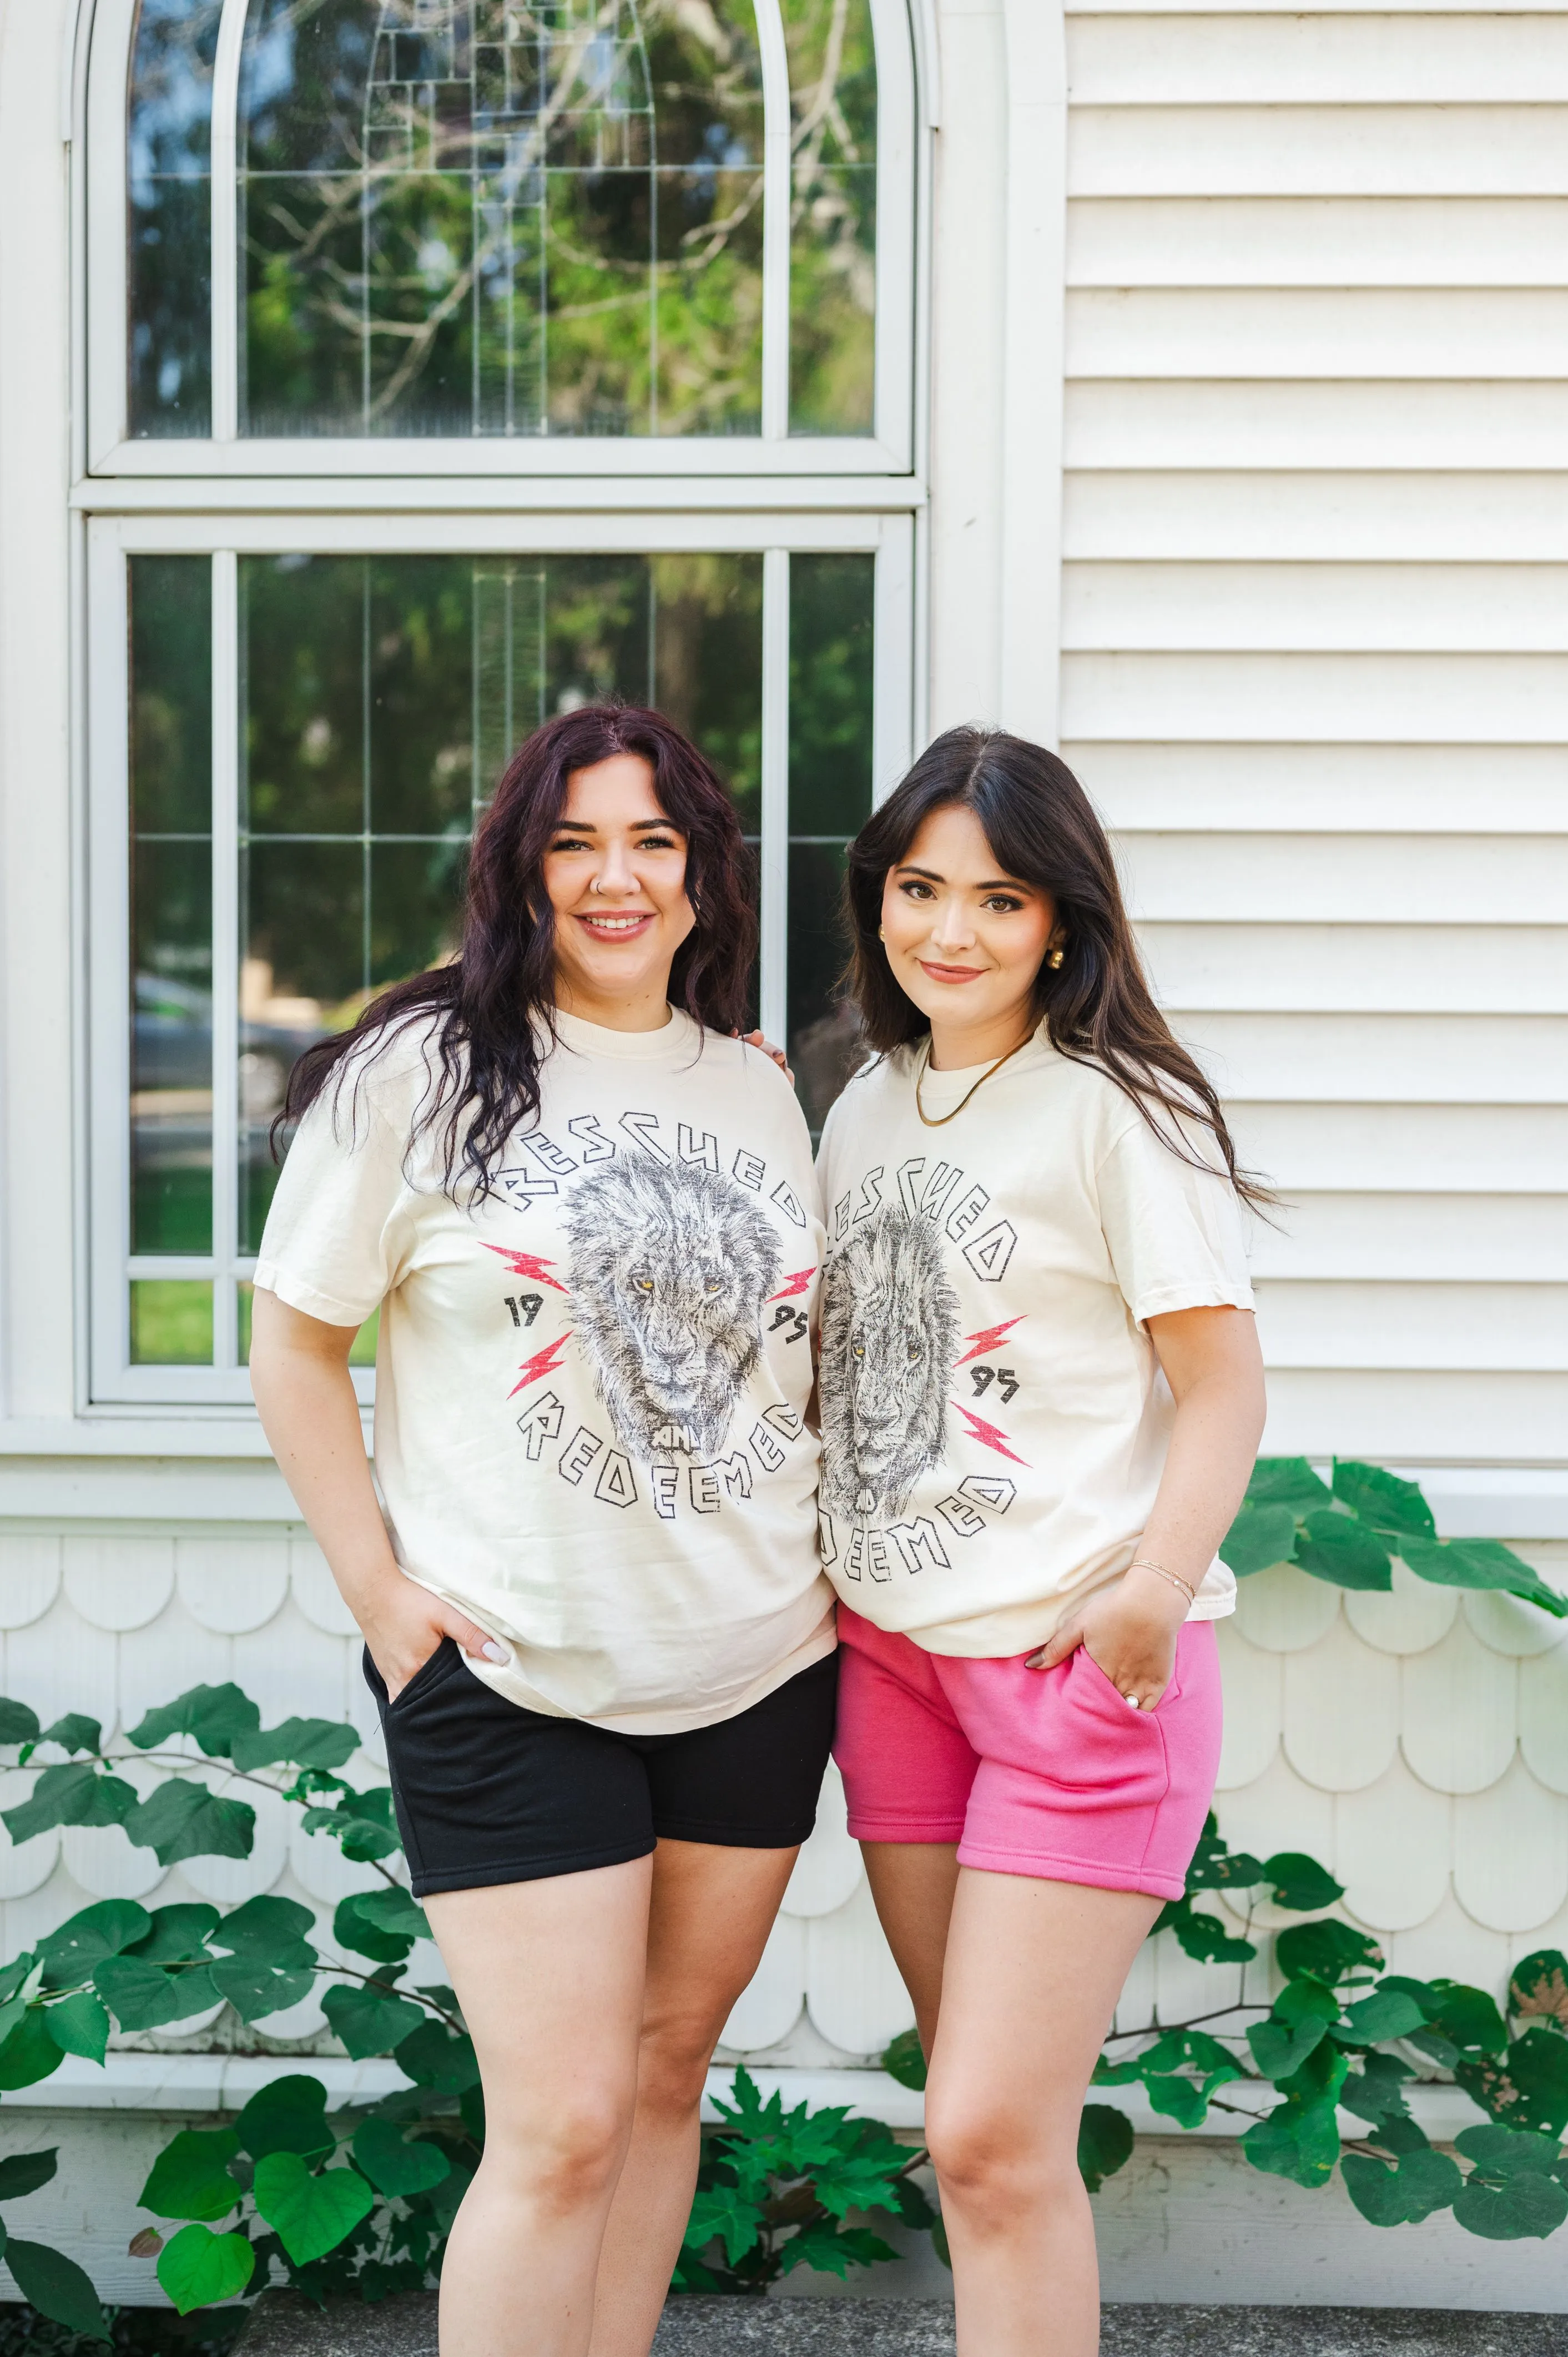 Two smiling women standing together in front of a house with a white window, wearing matching beige T-shirts with a wolf print design and different colored shorts.